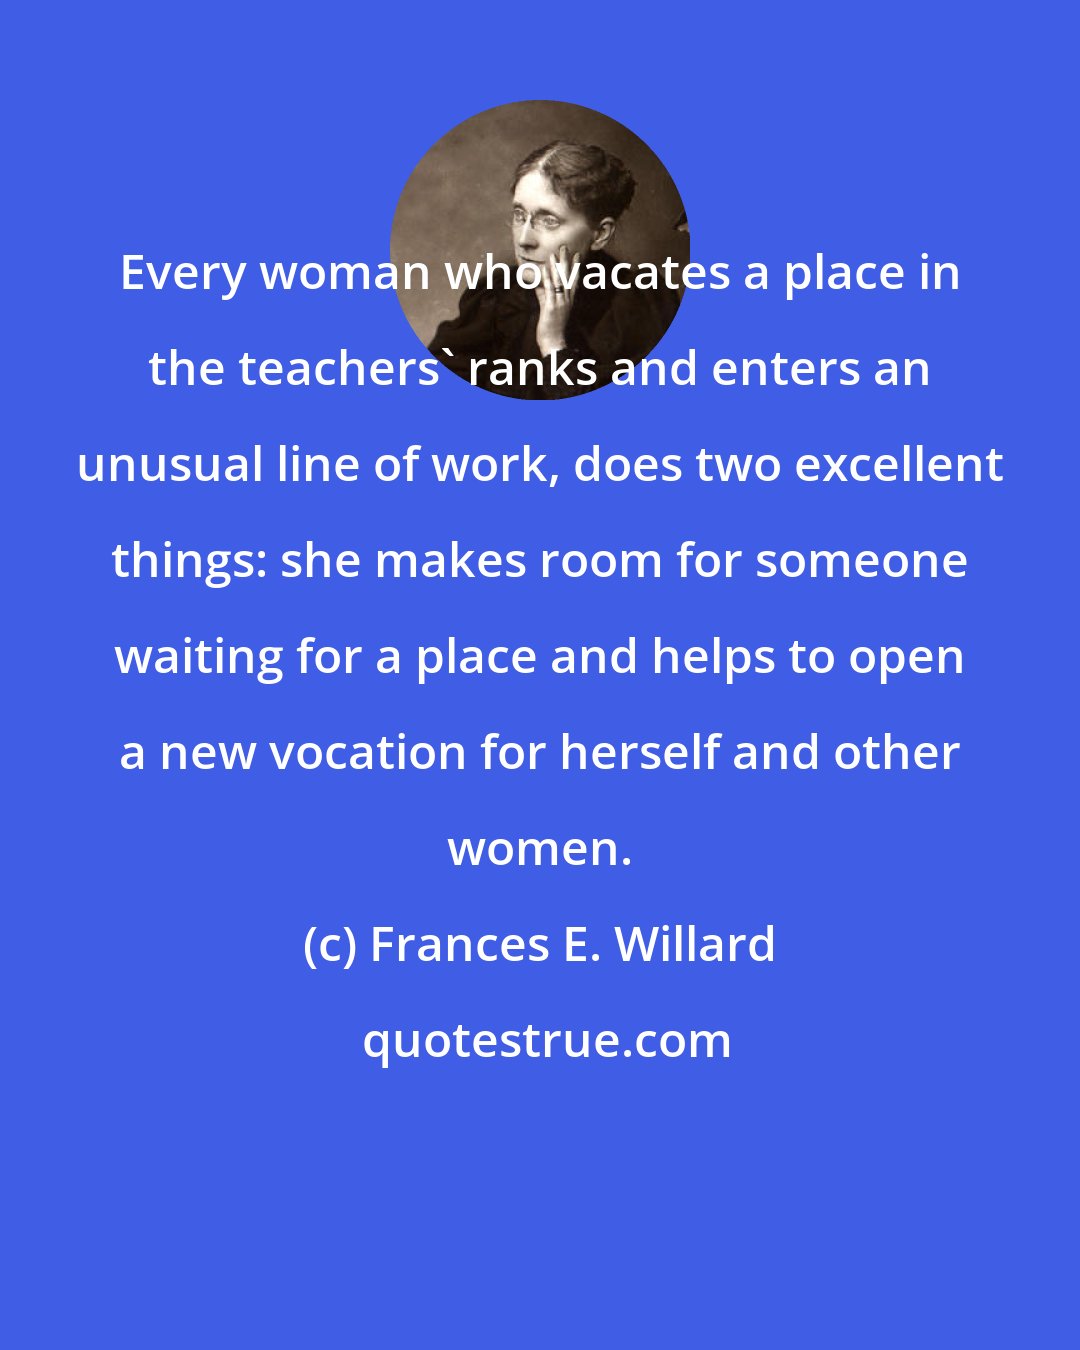 Frances E. Willard: Every woman who vacates a place in the teachers' ranks and enters an unusual line of work, does two excellent things: she makes room for someone waiting for a place and helps to open a new vocation for herself and other women.